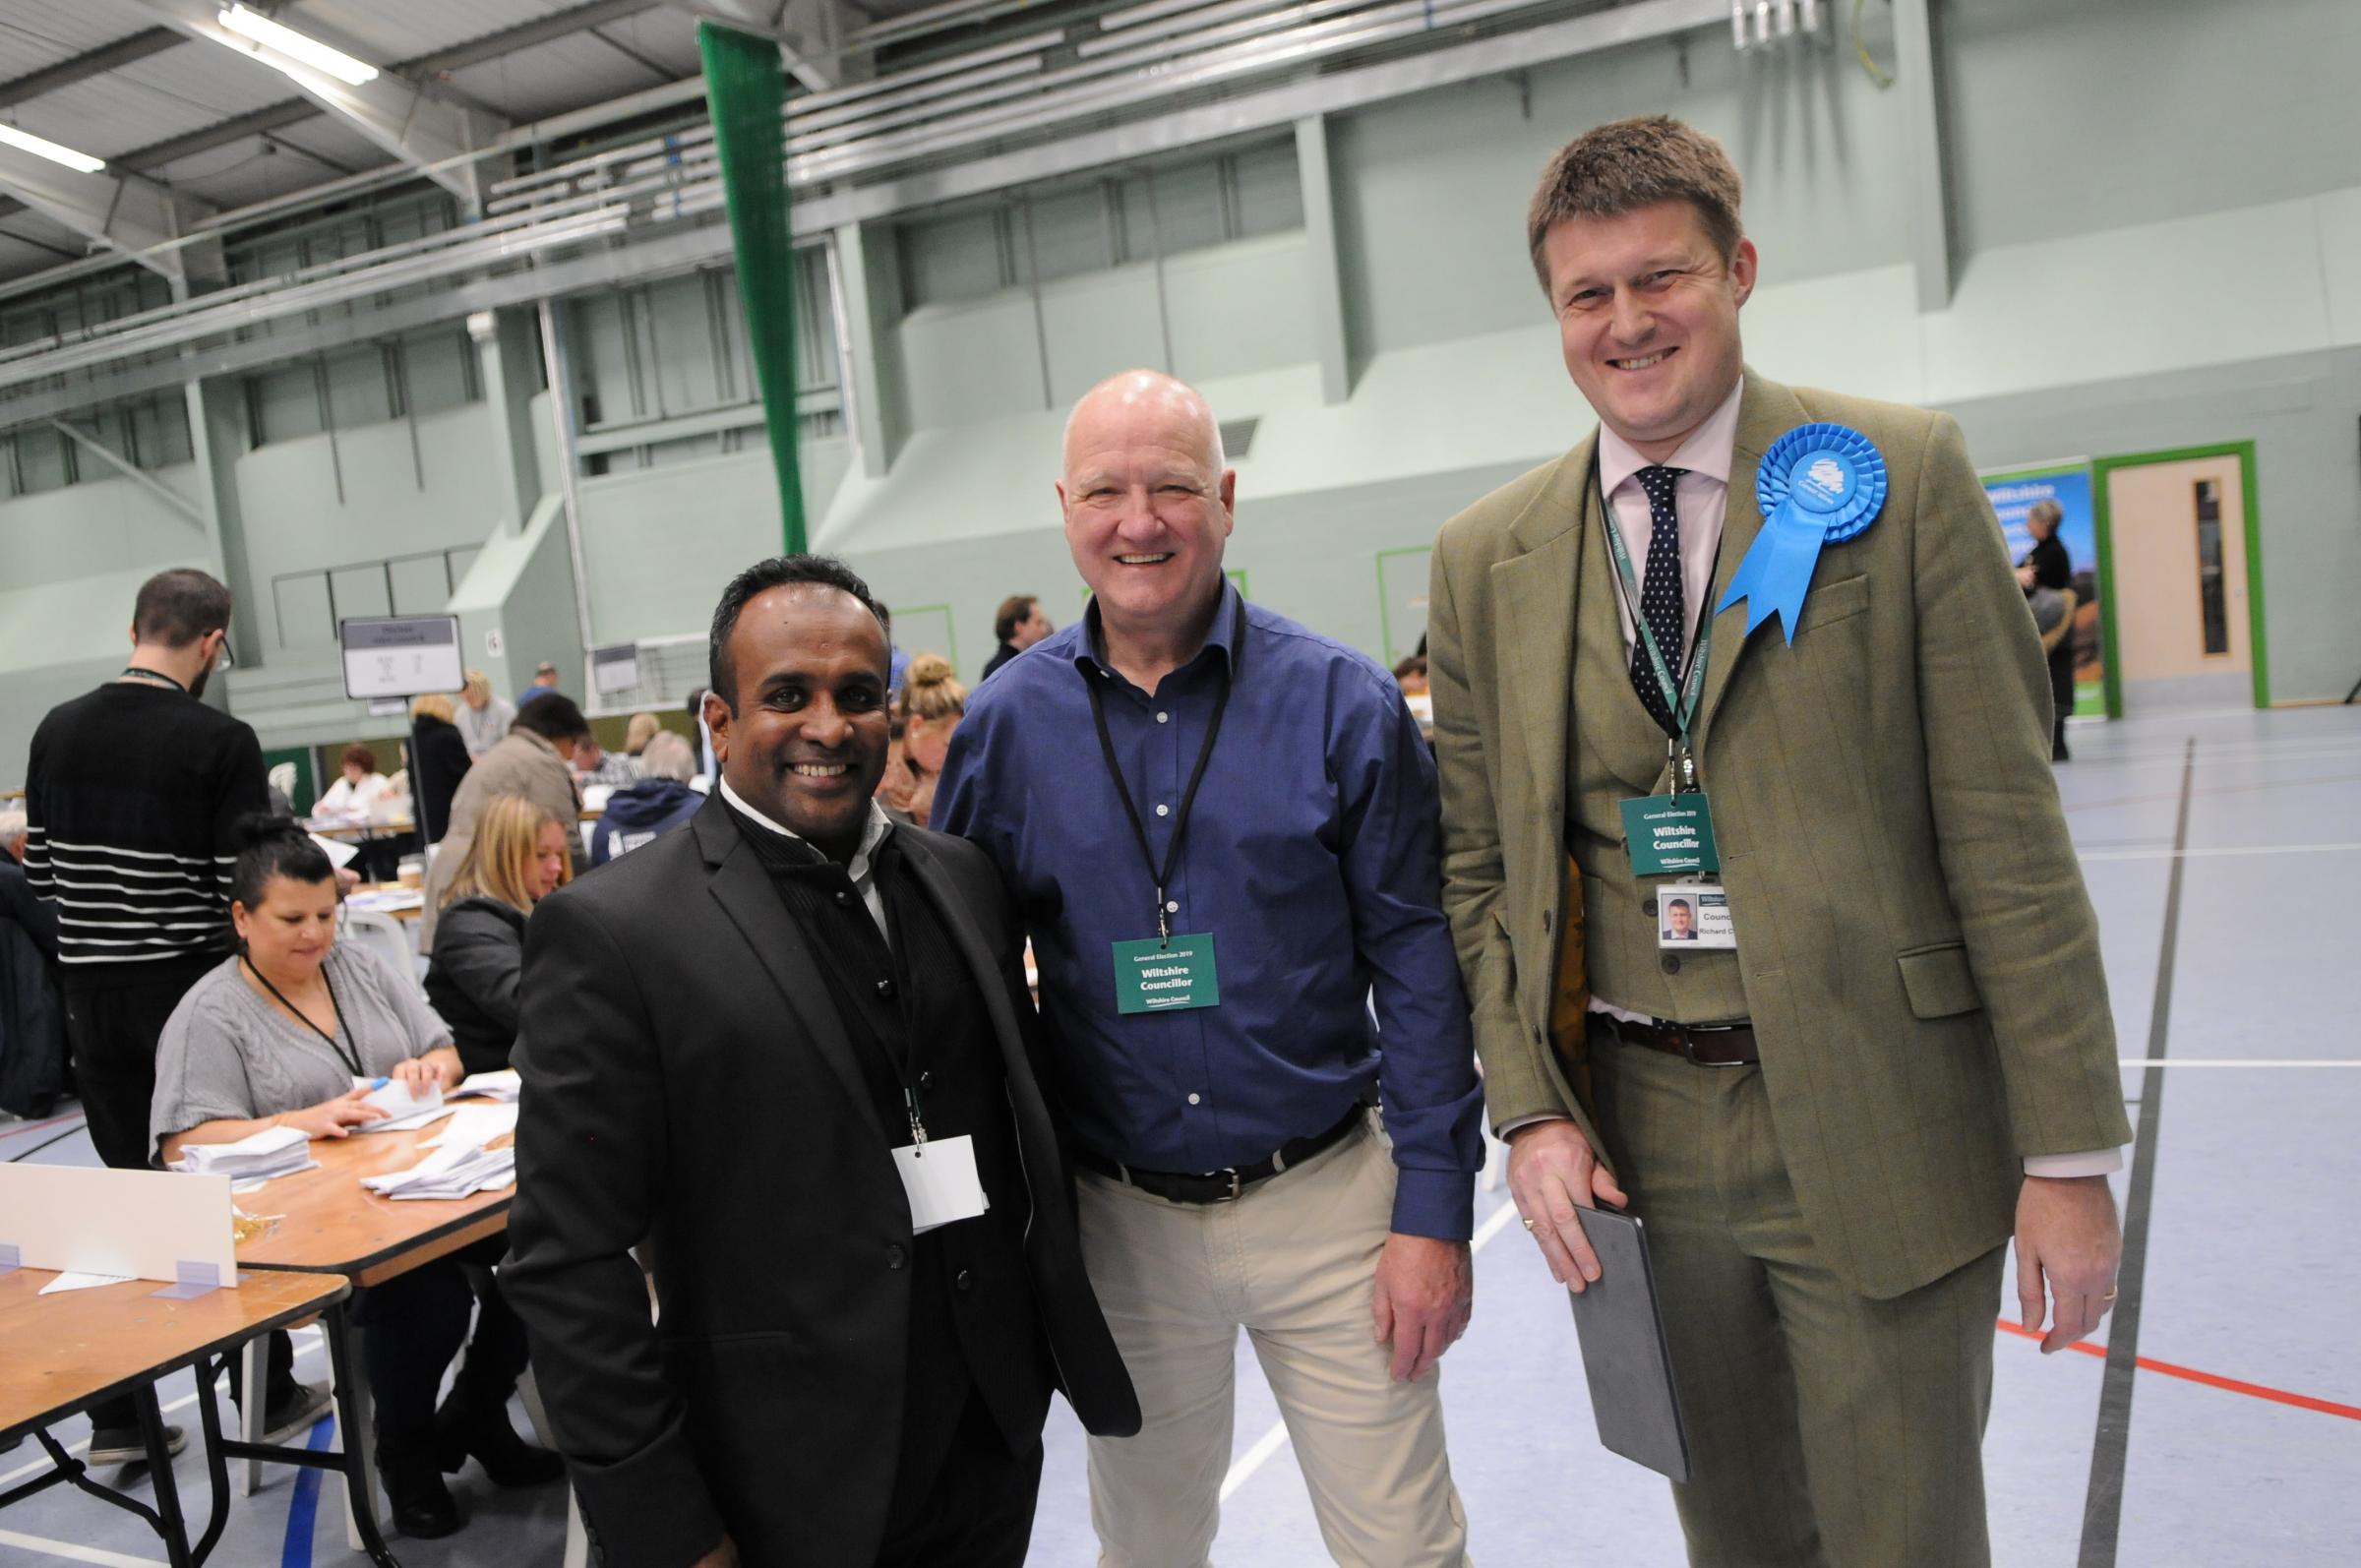 L-R: Cllrs Atiqul Hoque, Philip Whitehead, and Richard Clewer. Picture by Tom Gregory